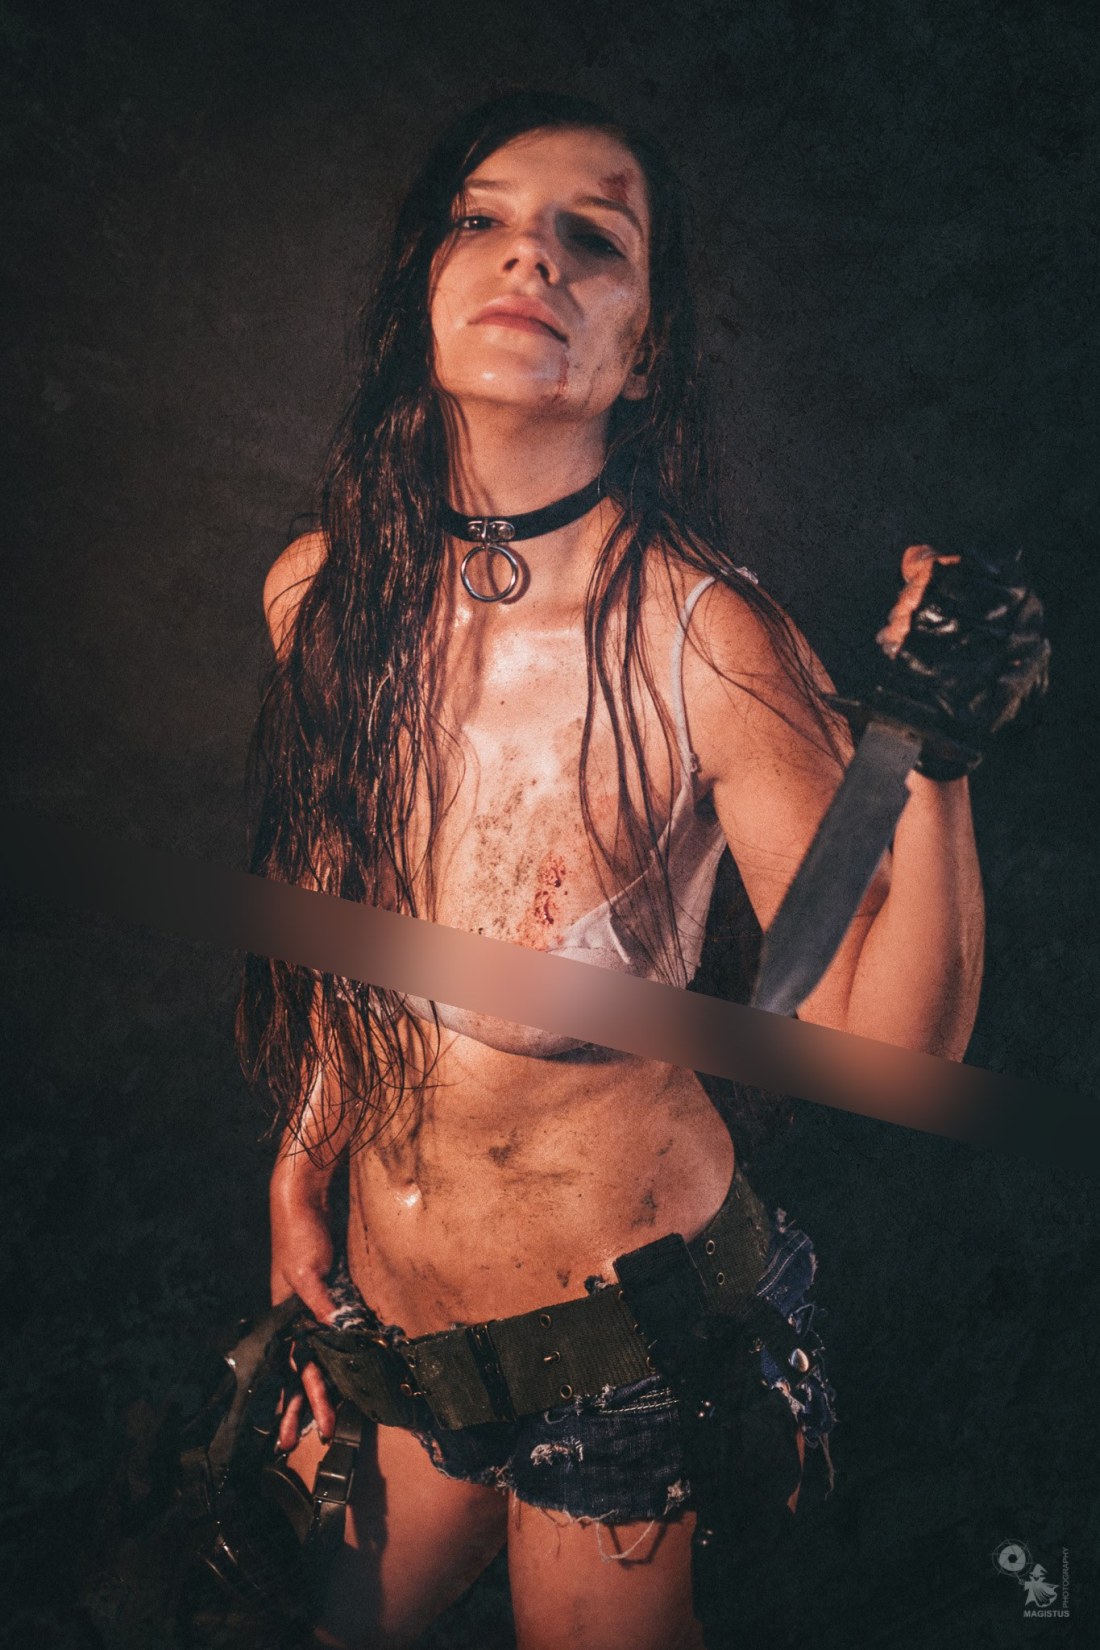 Dirty fightergirl posing topless in dirt